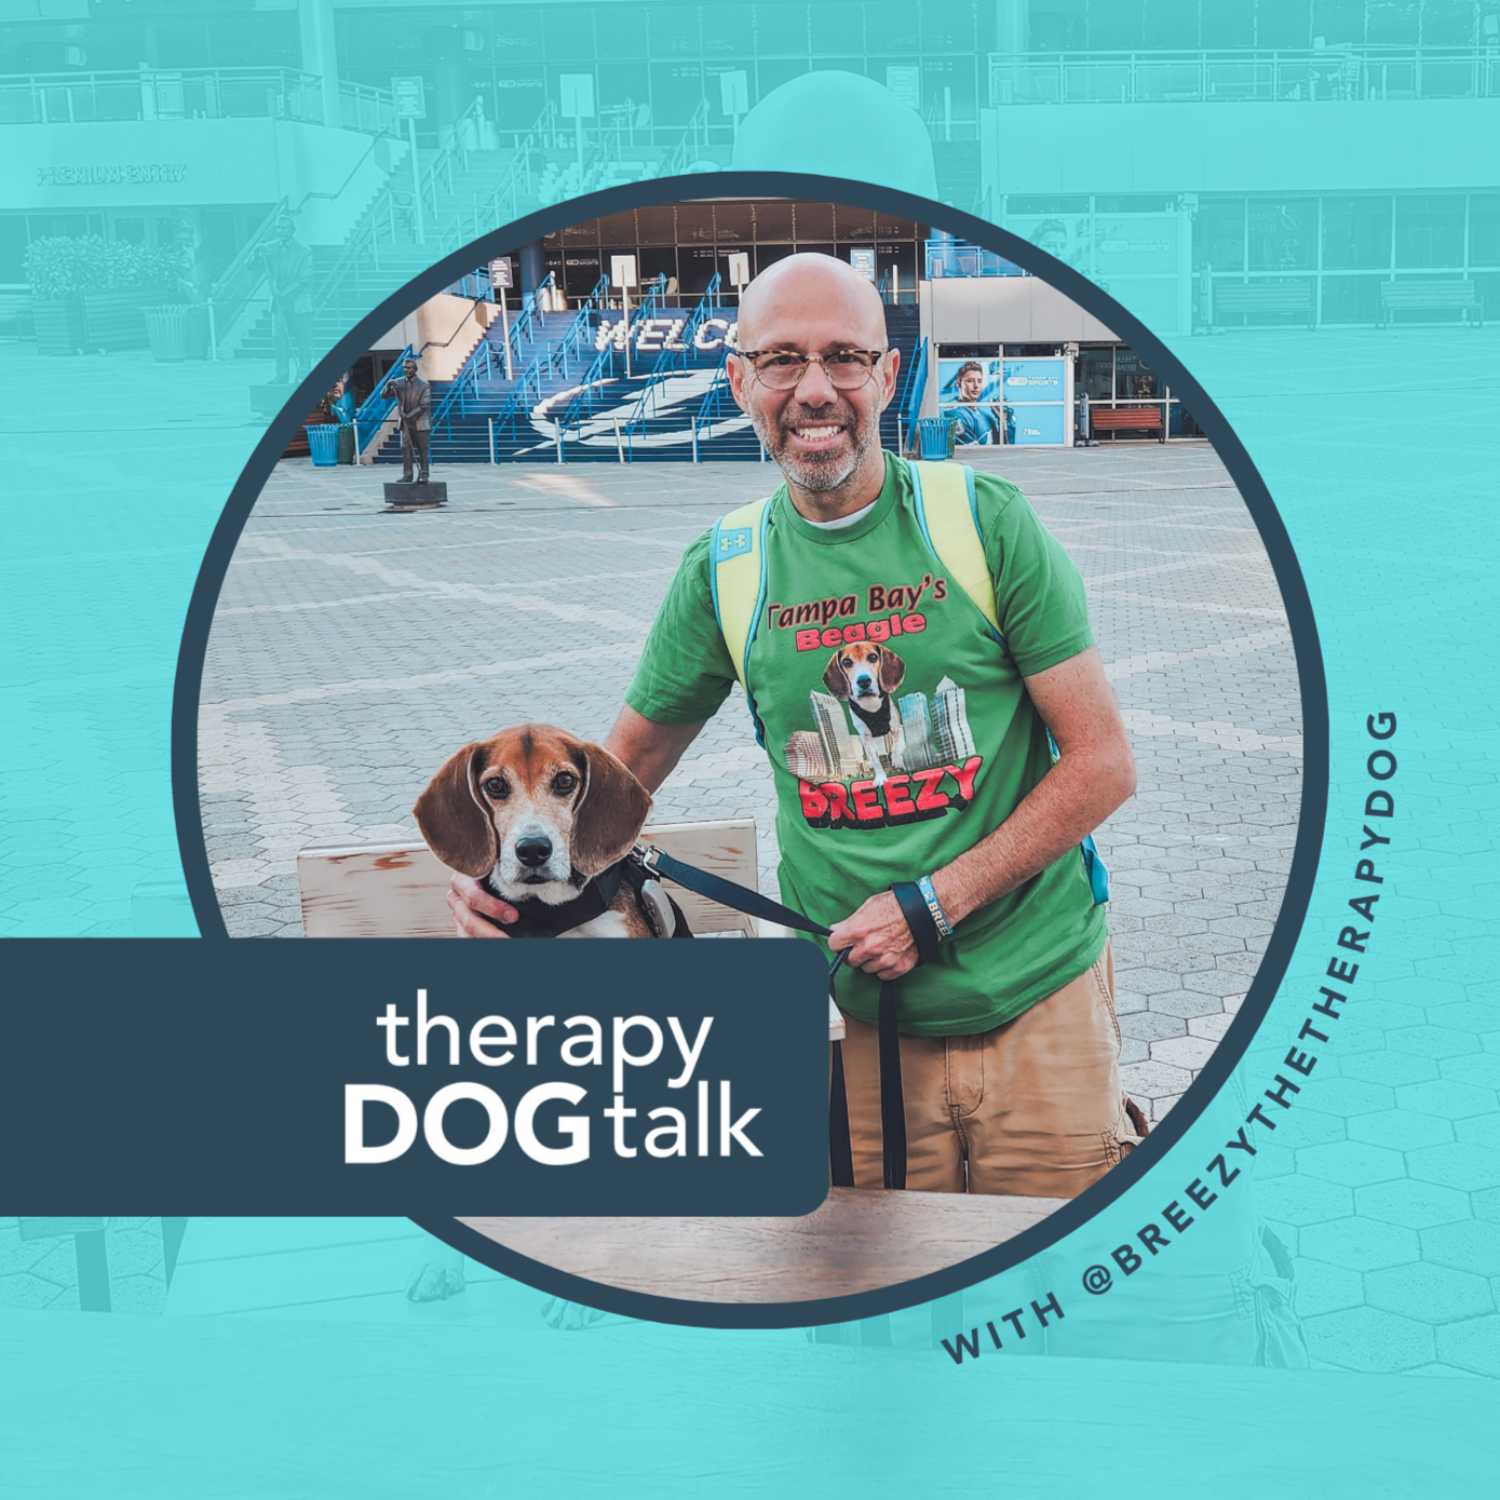 Neil + Breezy: A Beagle pet therapy team in Tampa, FL.